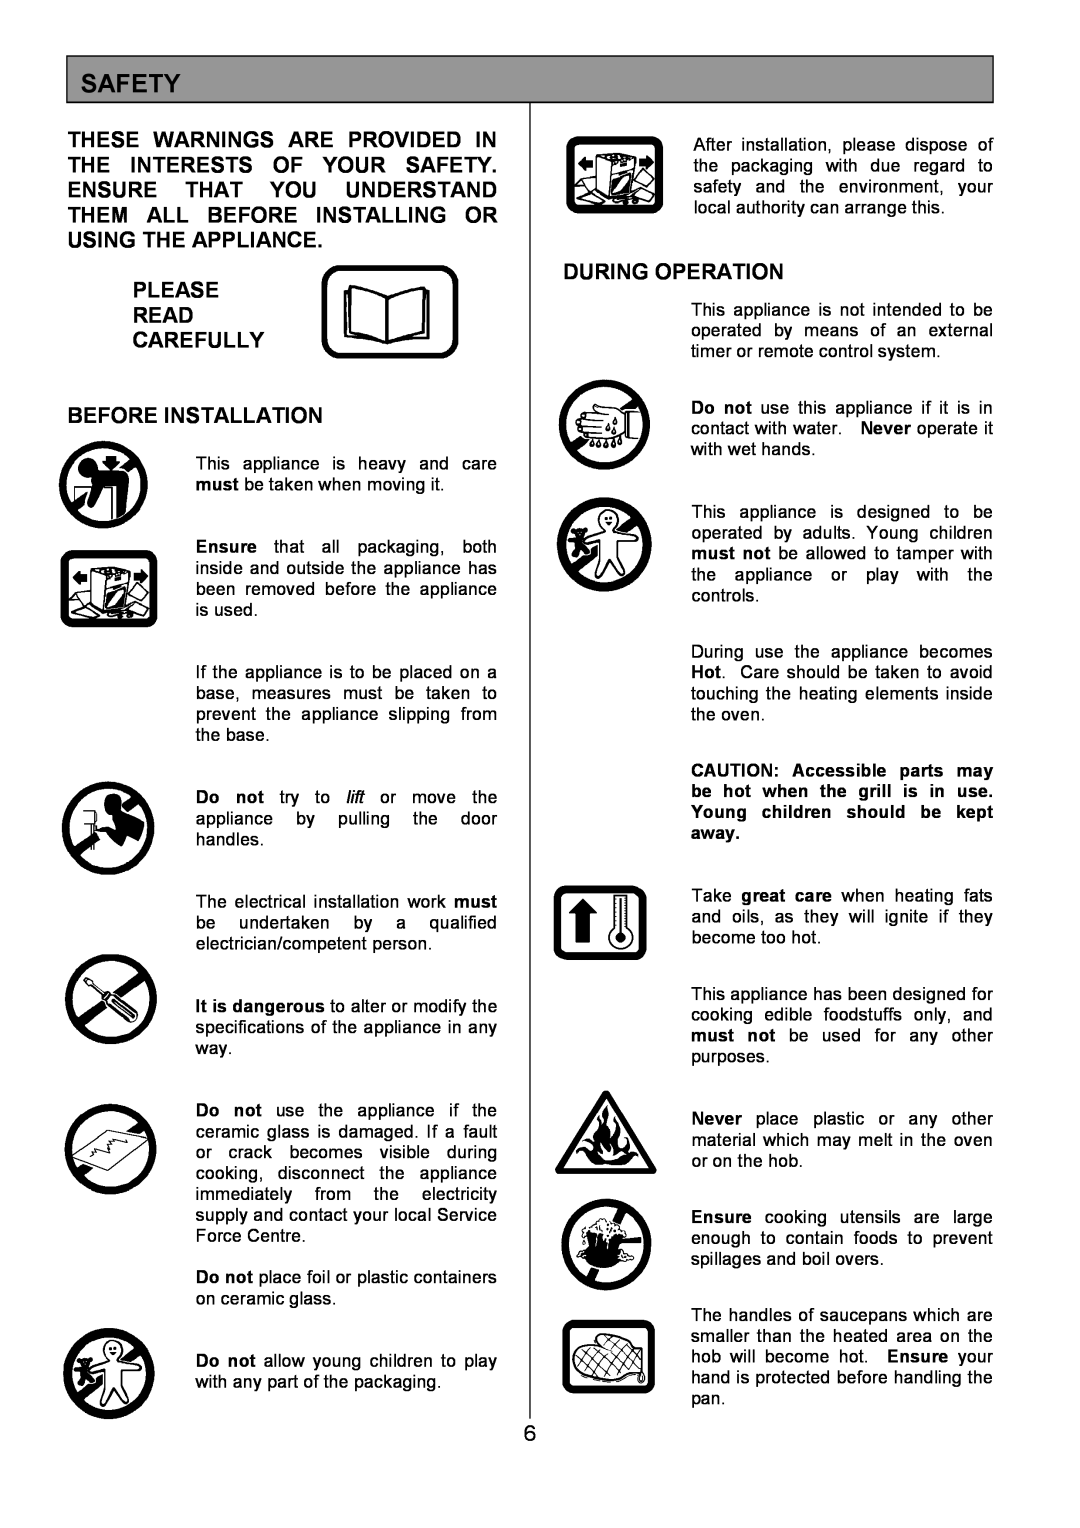 Tricity Bendix SIE424 installation instructions Safety, Please Read Carefully Before Installation, During Operation 